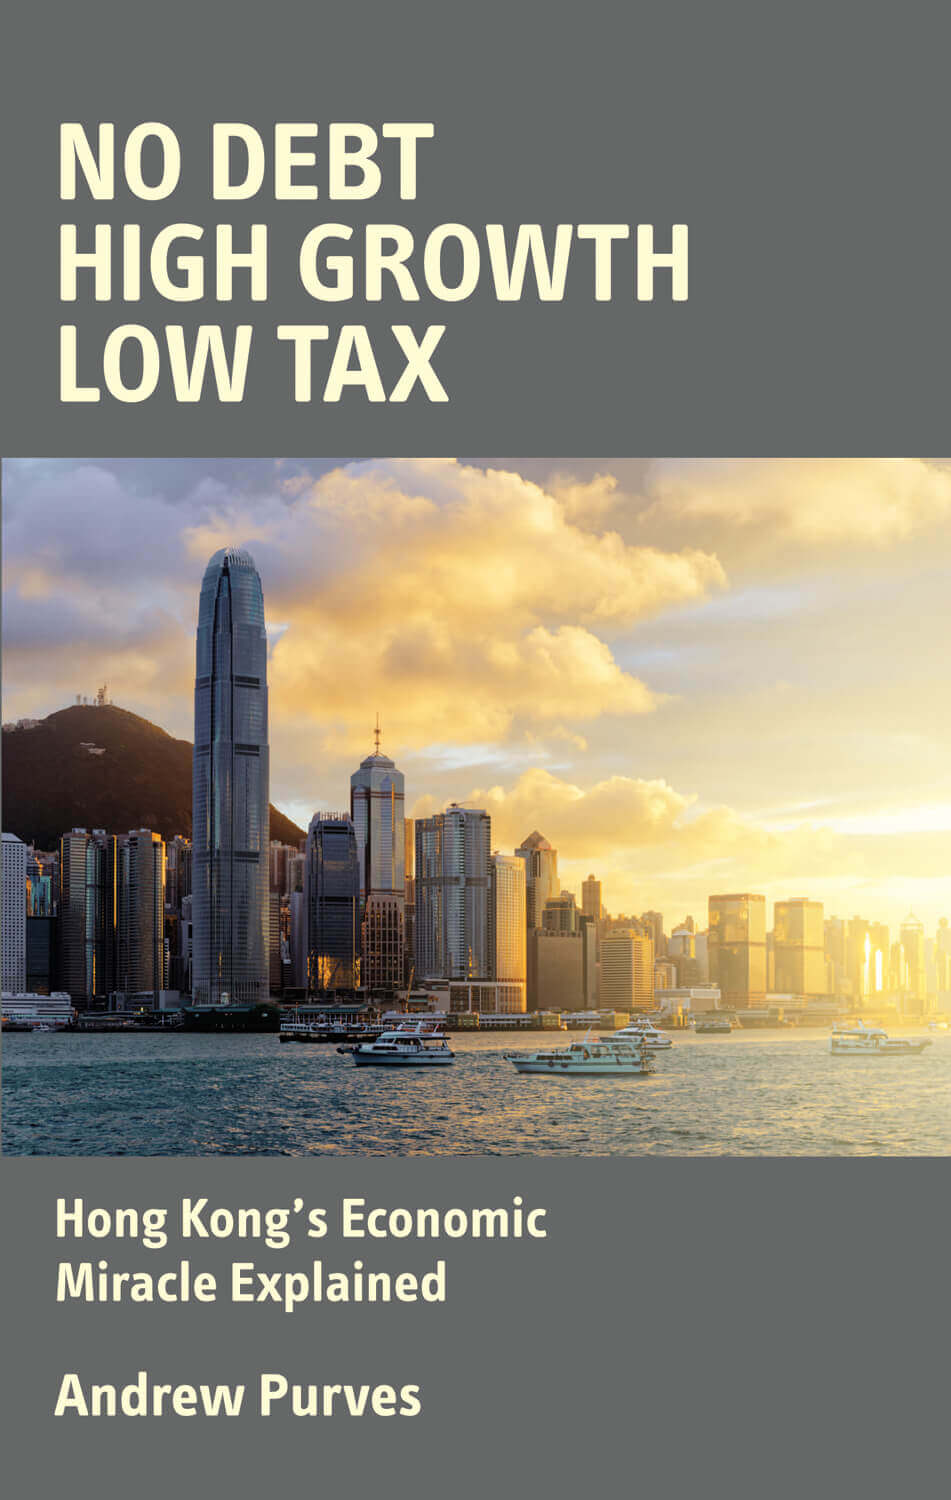 No Debt, High Growth, Low Tax Book Cover - Andrew Purves - Shepheard Walwyn Publishers